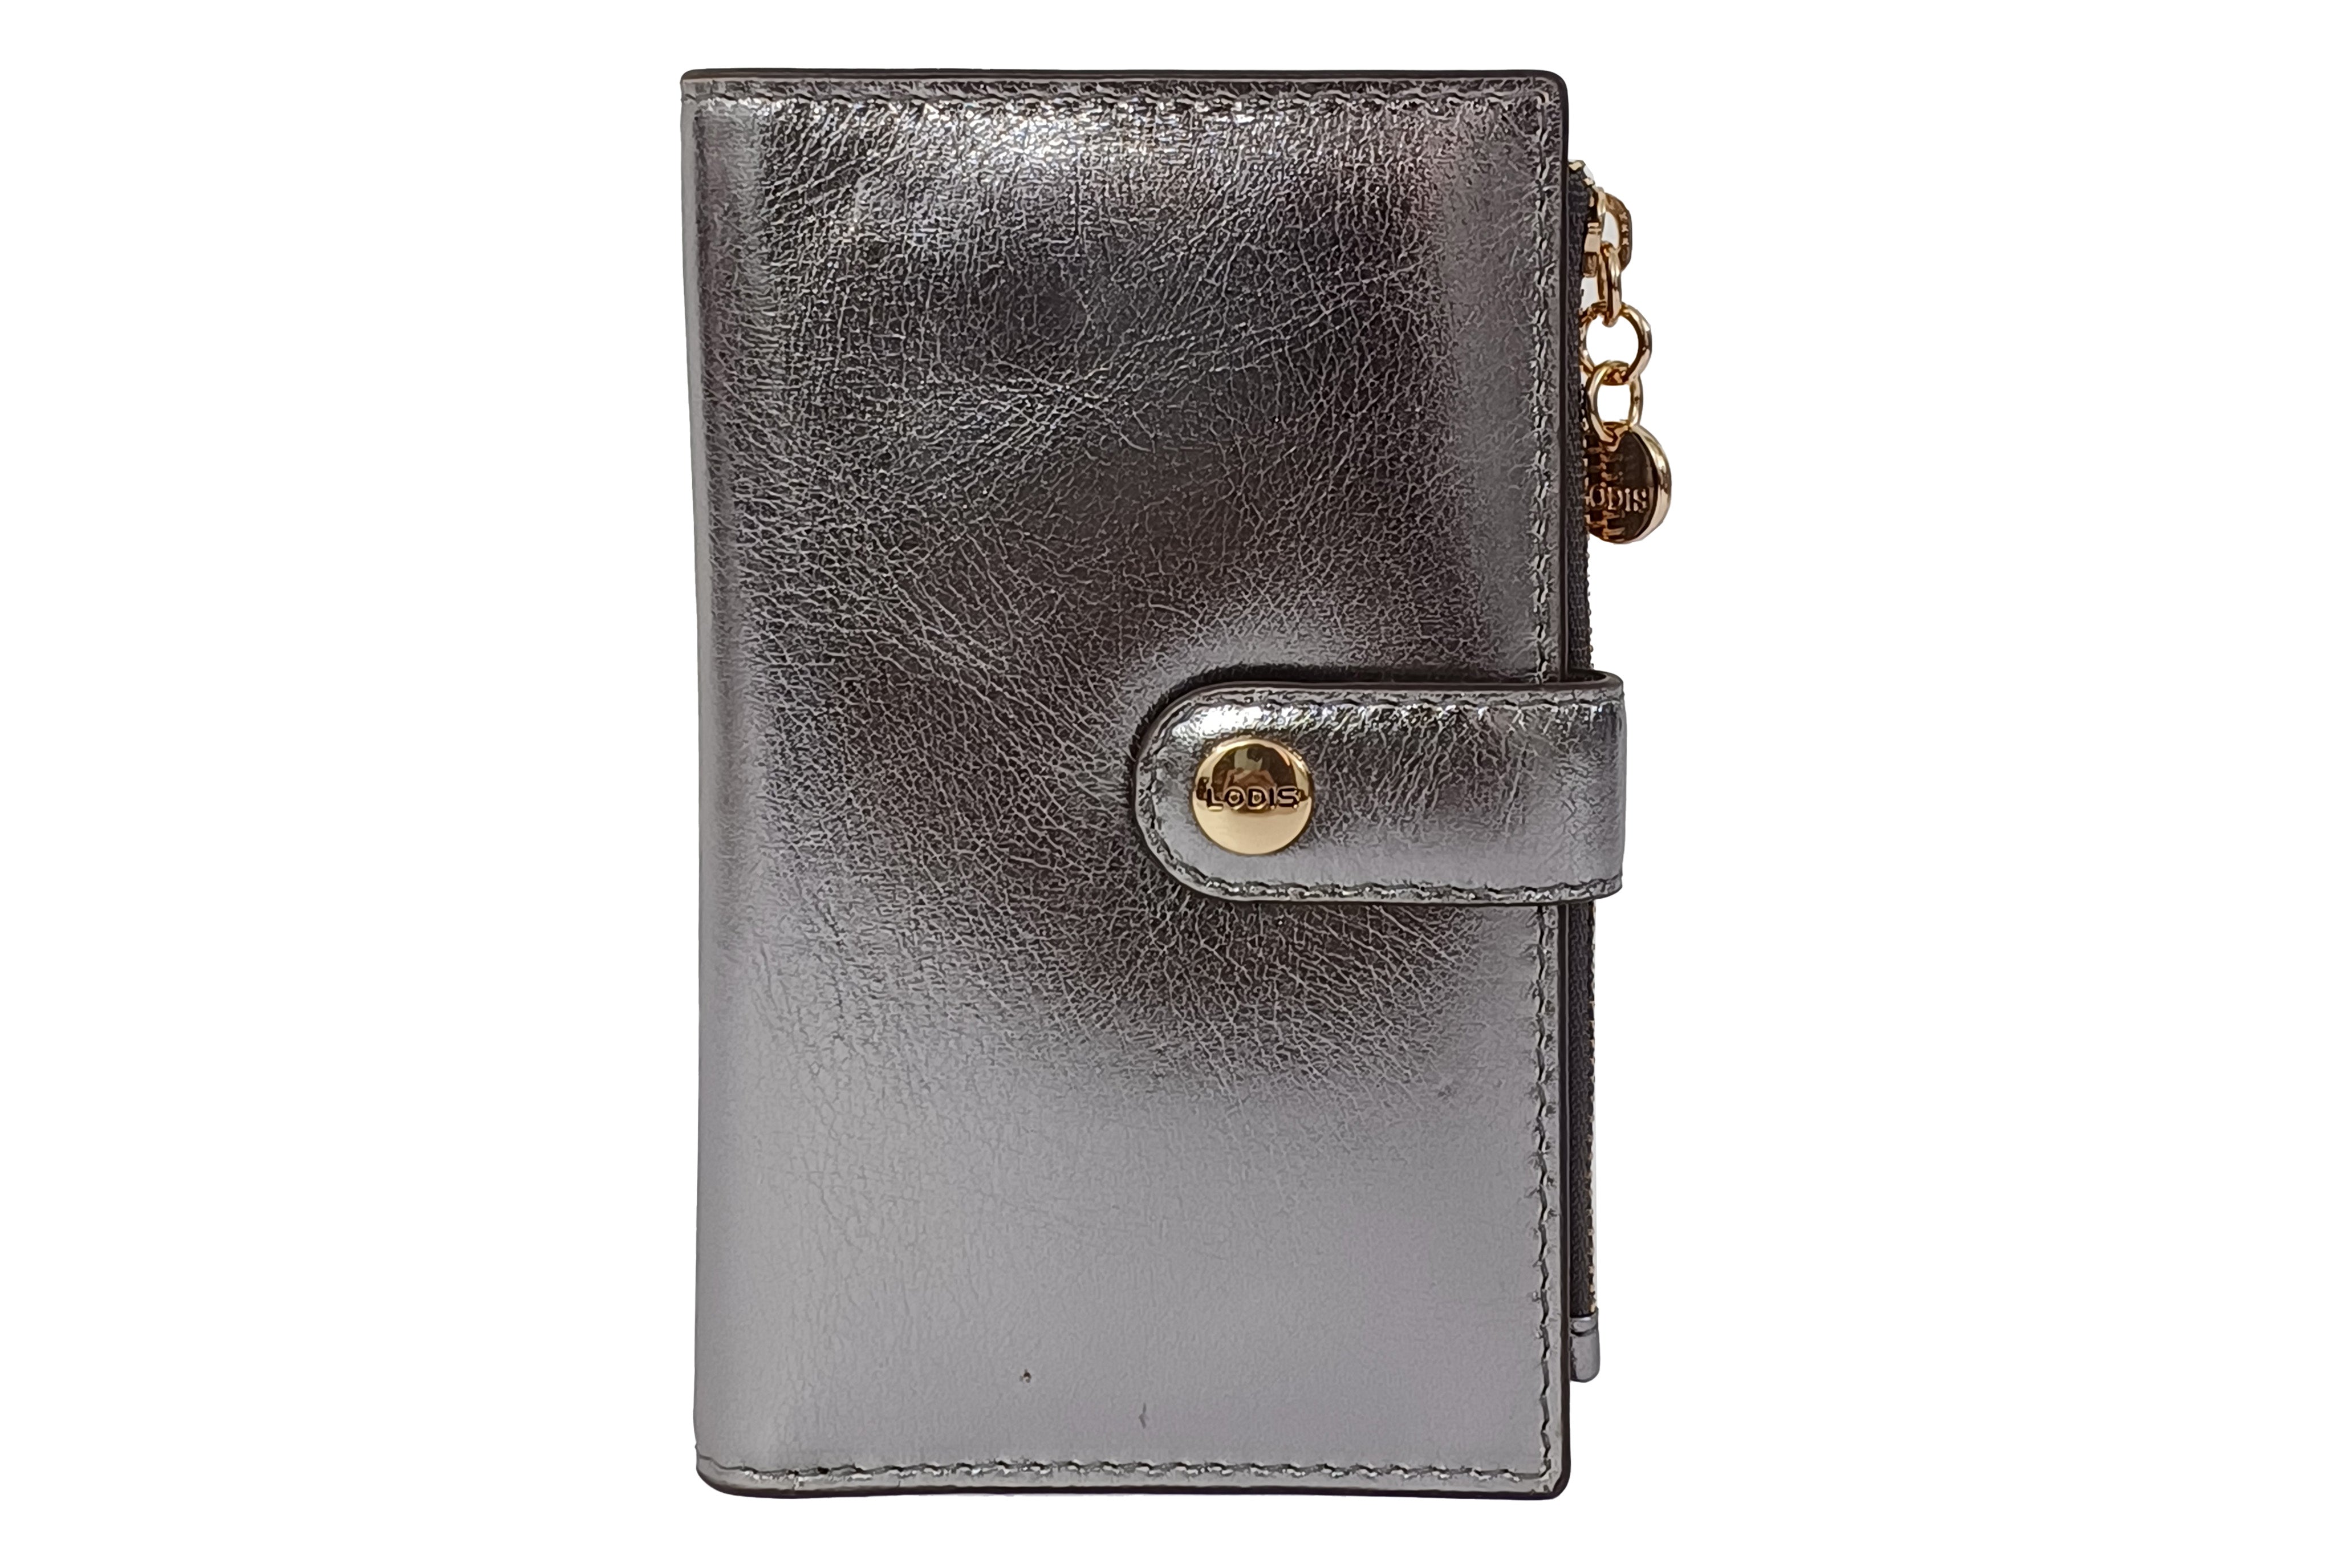 Buy the Stylish Kate Classic French Purse (Metallic) Today | Lodis